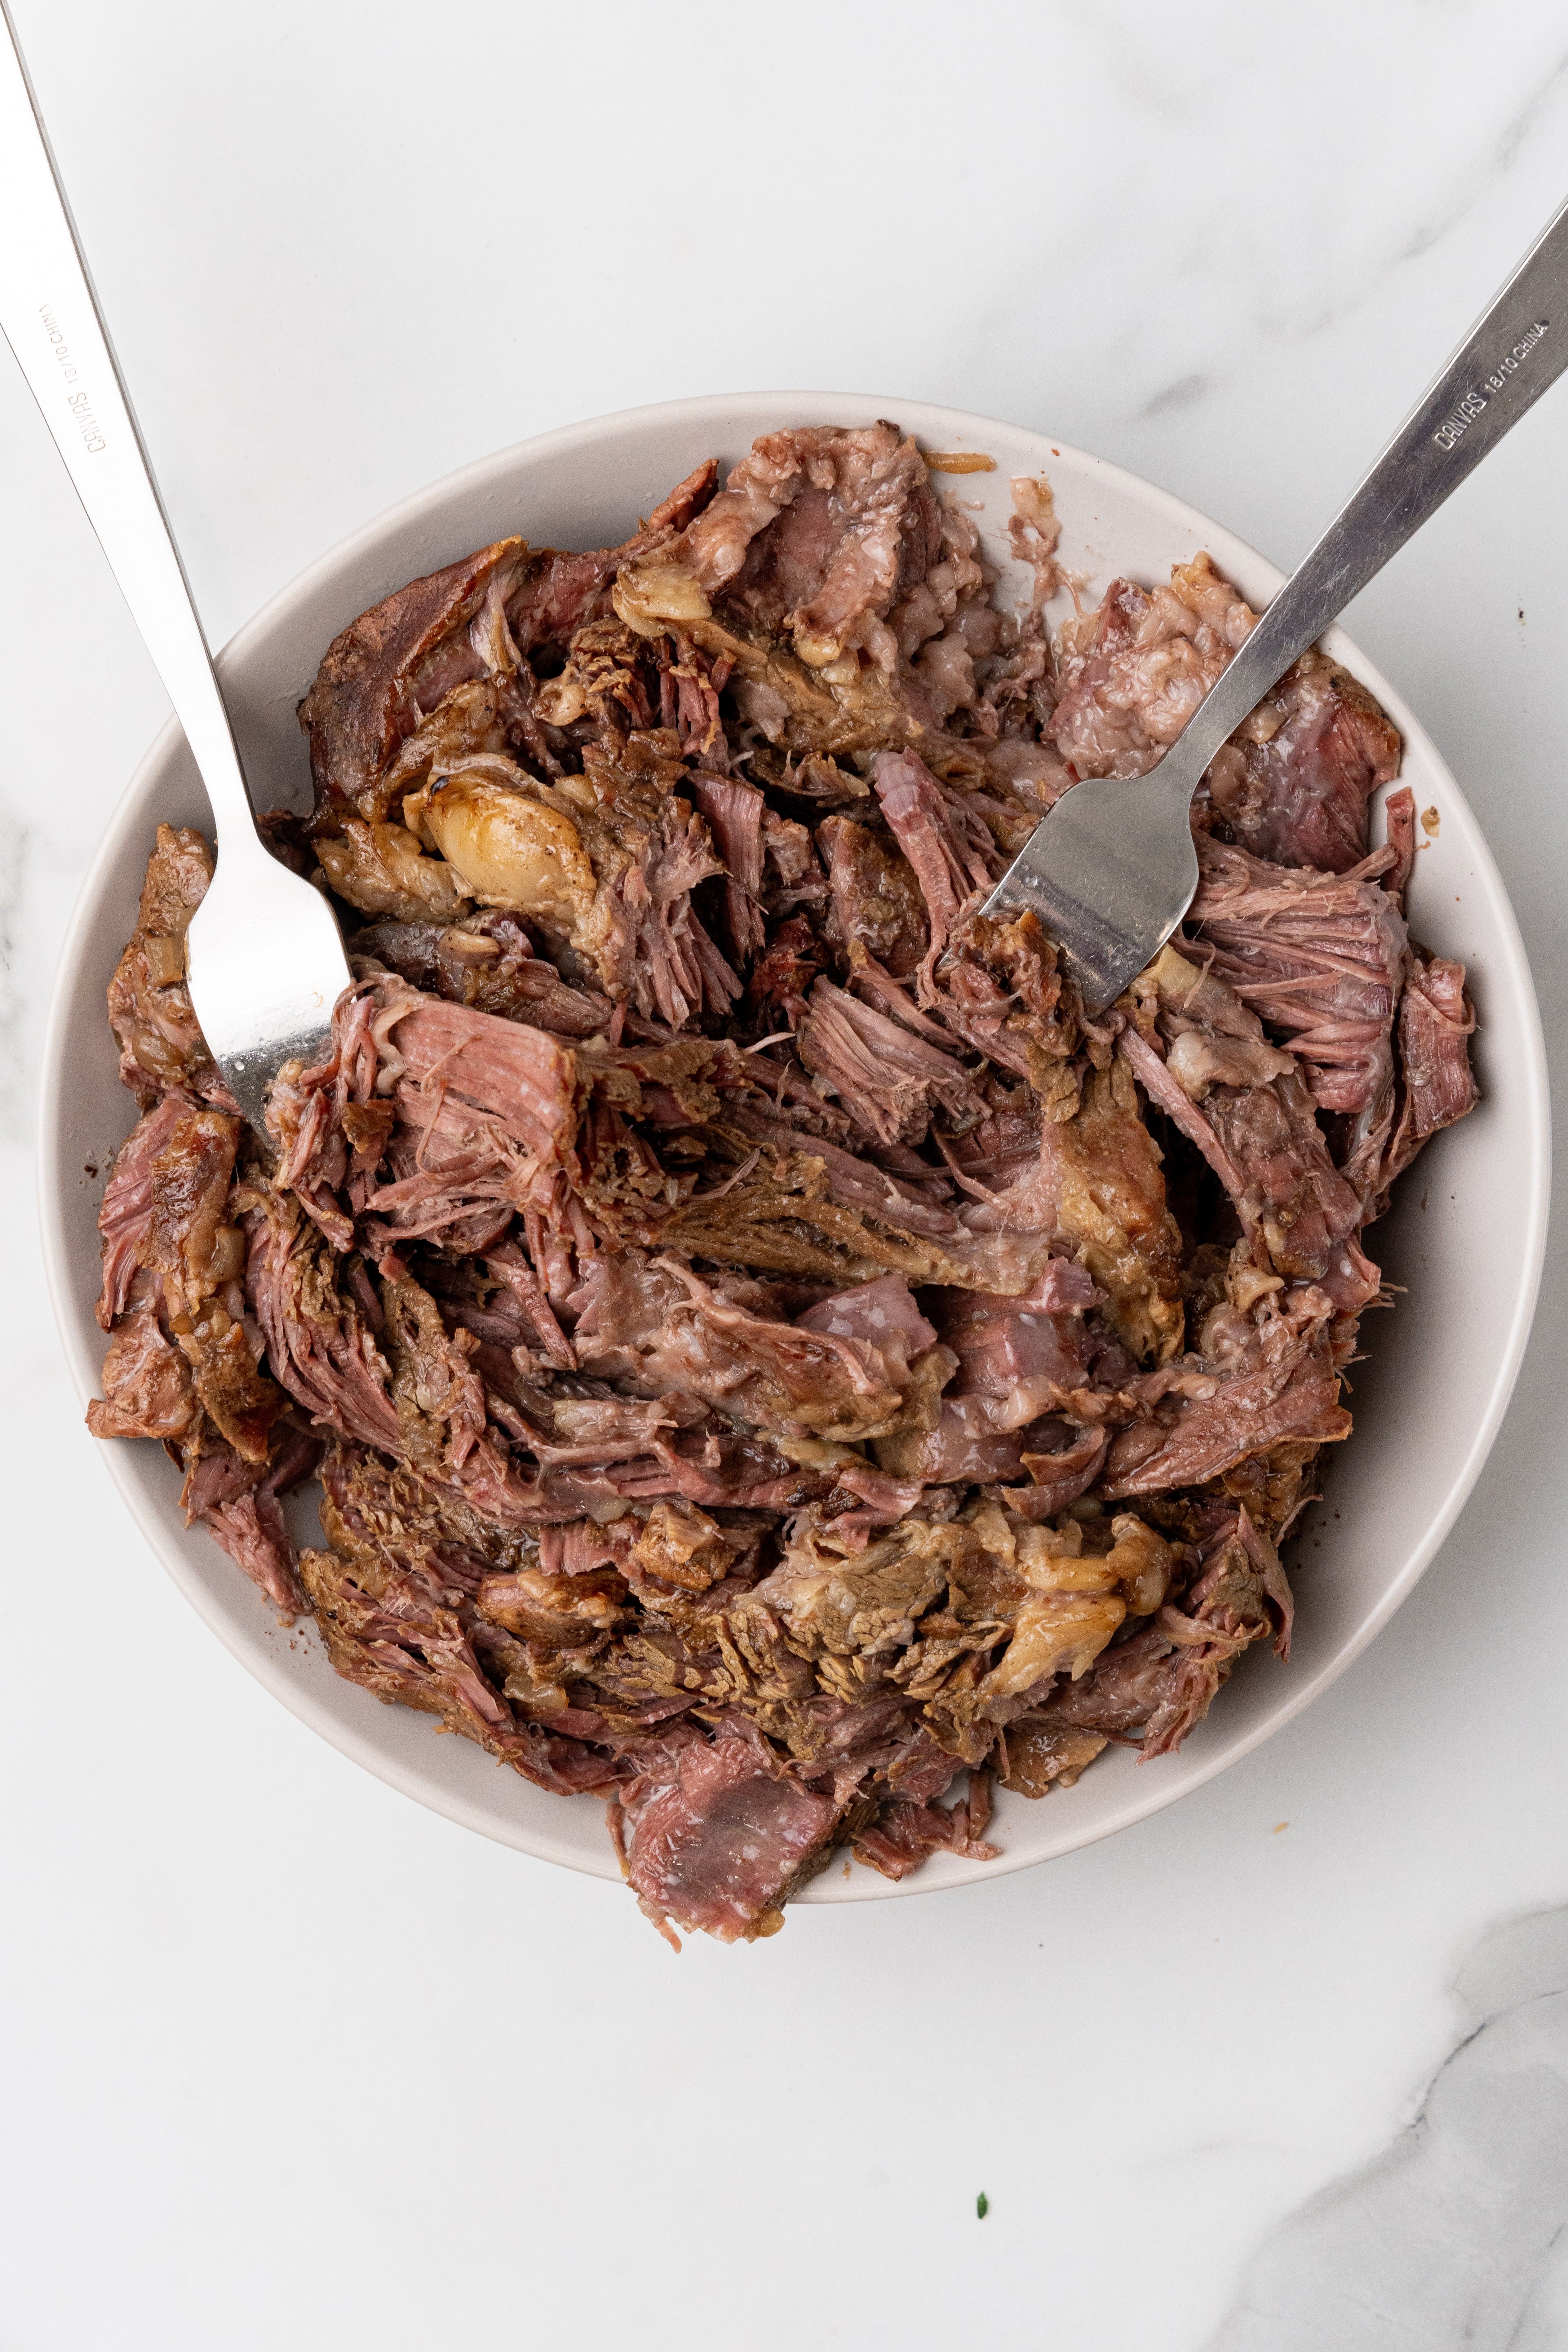 shredded roast beef in a white bowl with two forks resting on the side